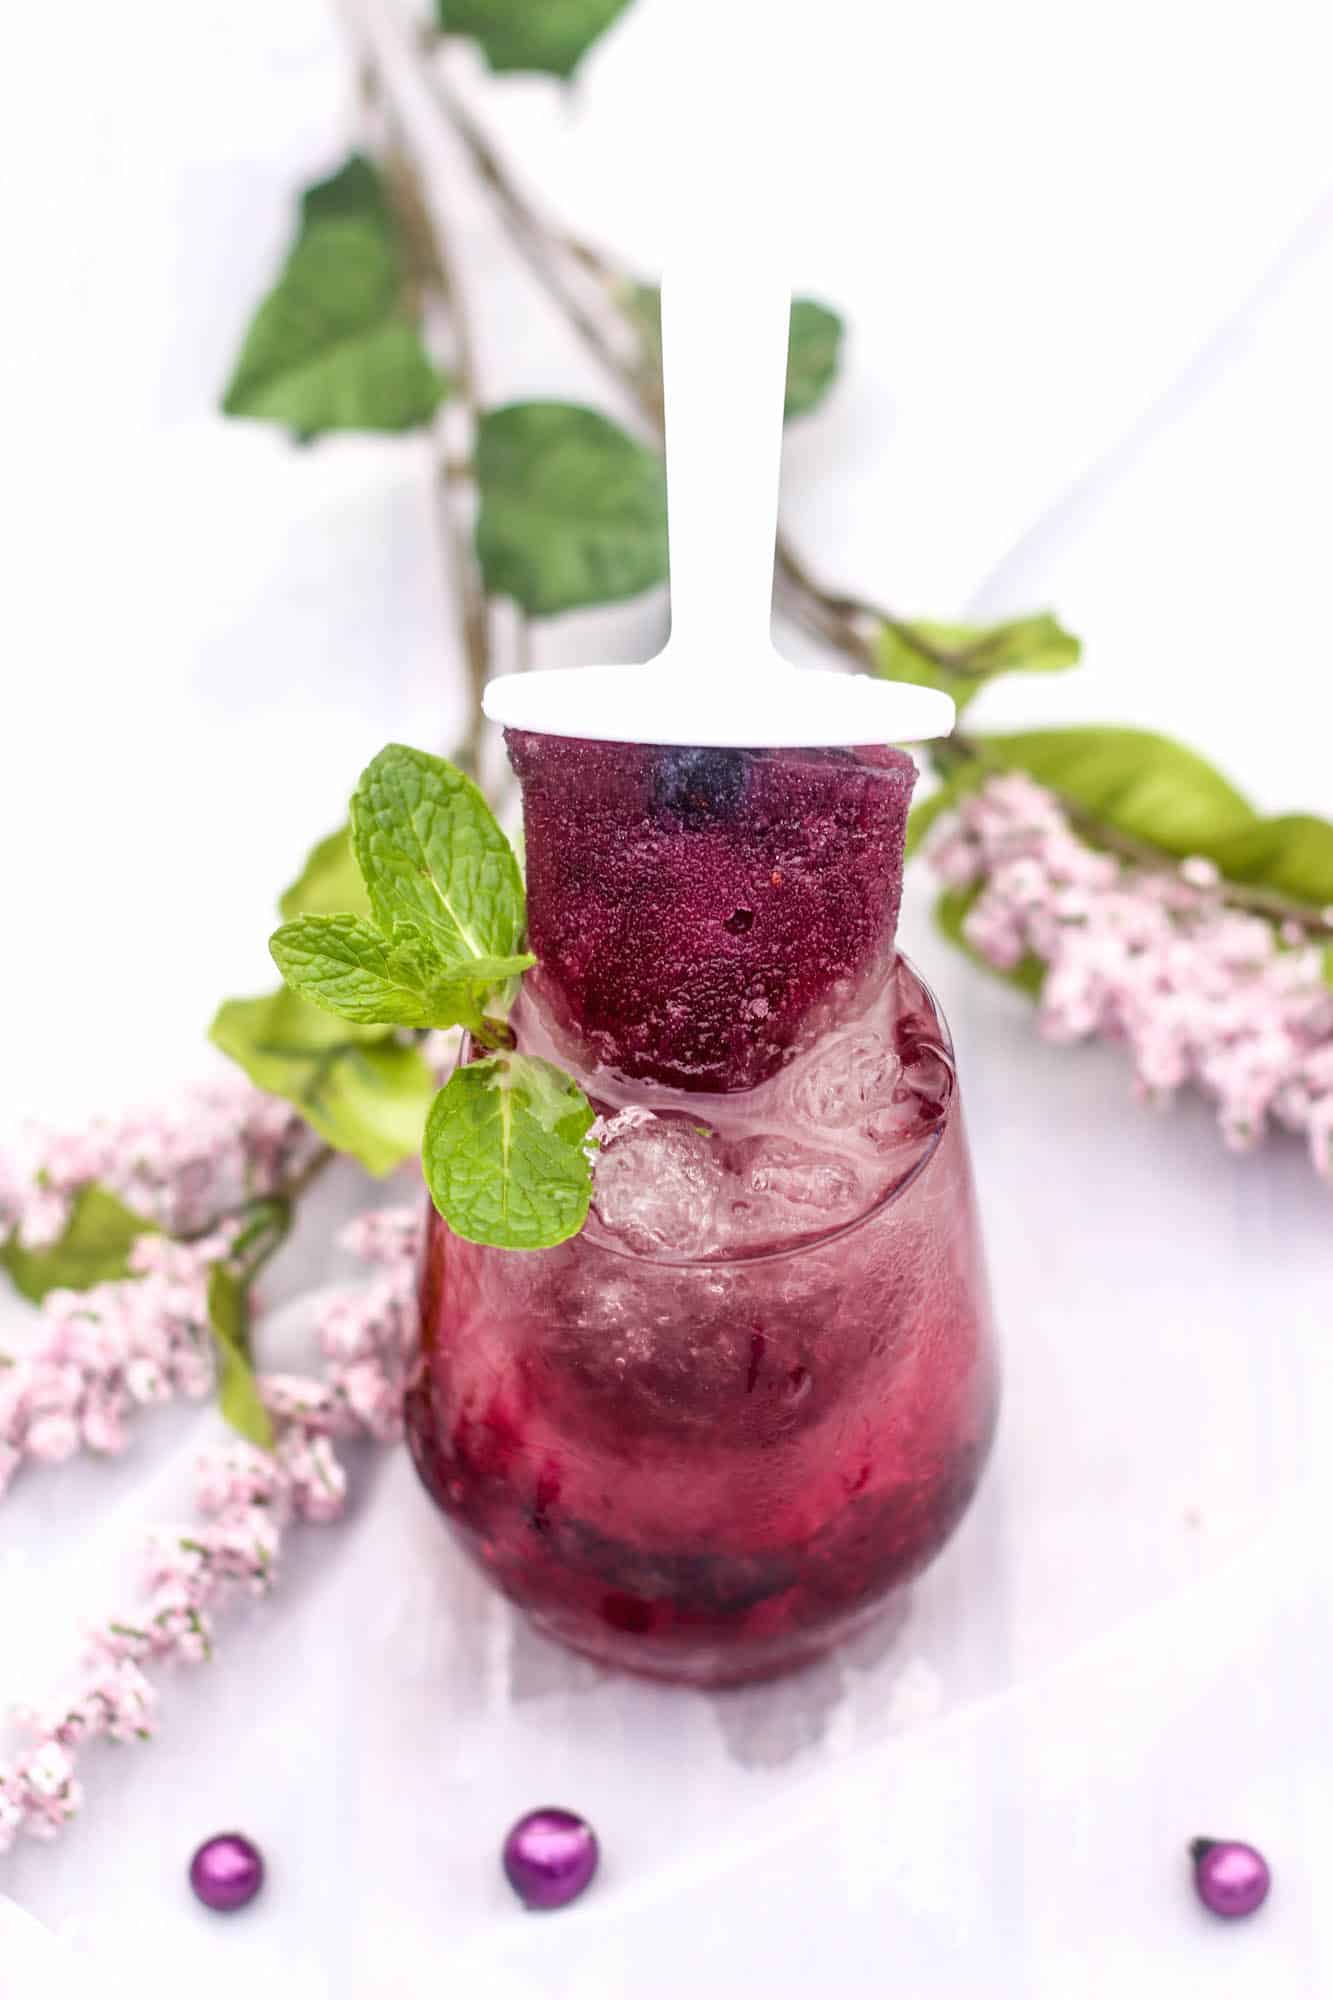 These delicious boozy popsicles will help you cool down this summer! You're going to love the blueberry combined with tasty Moscato wine. So refreshing!